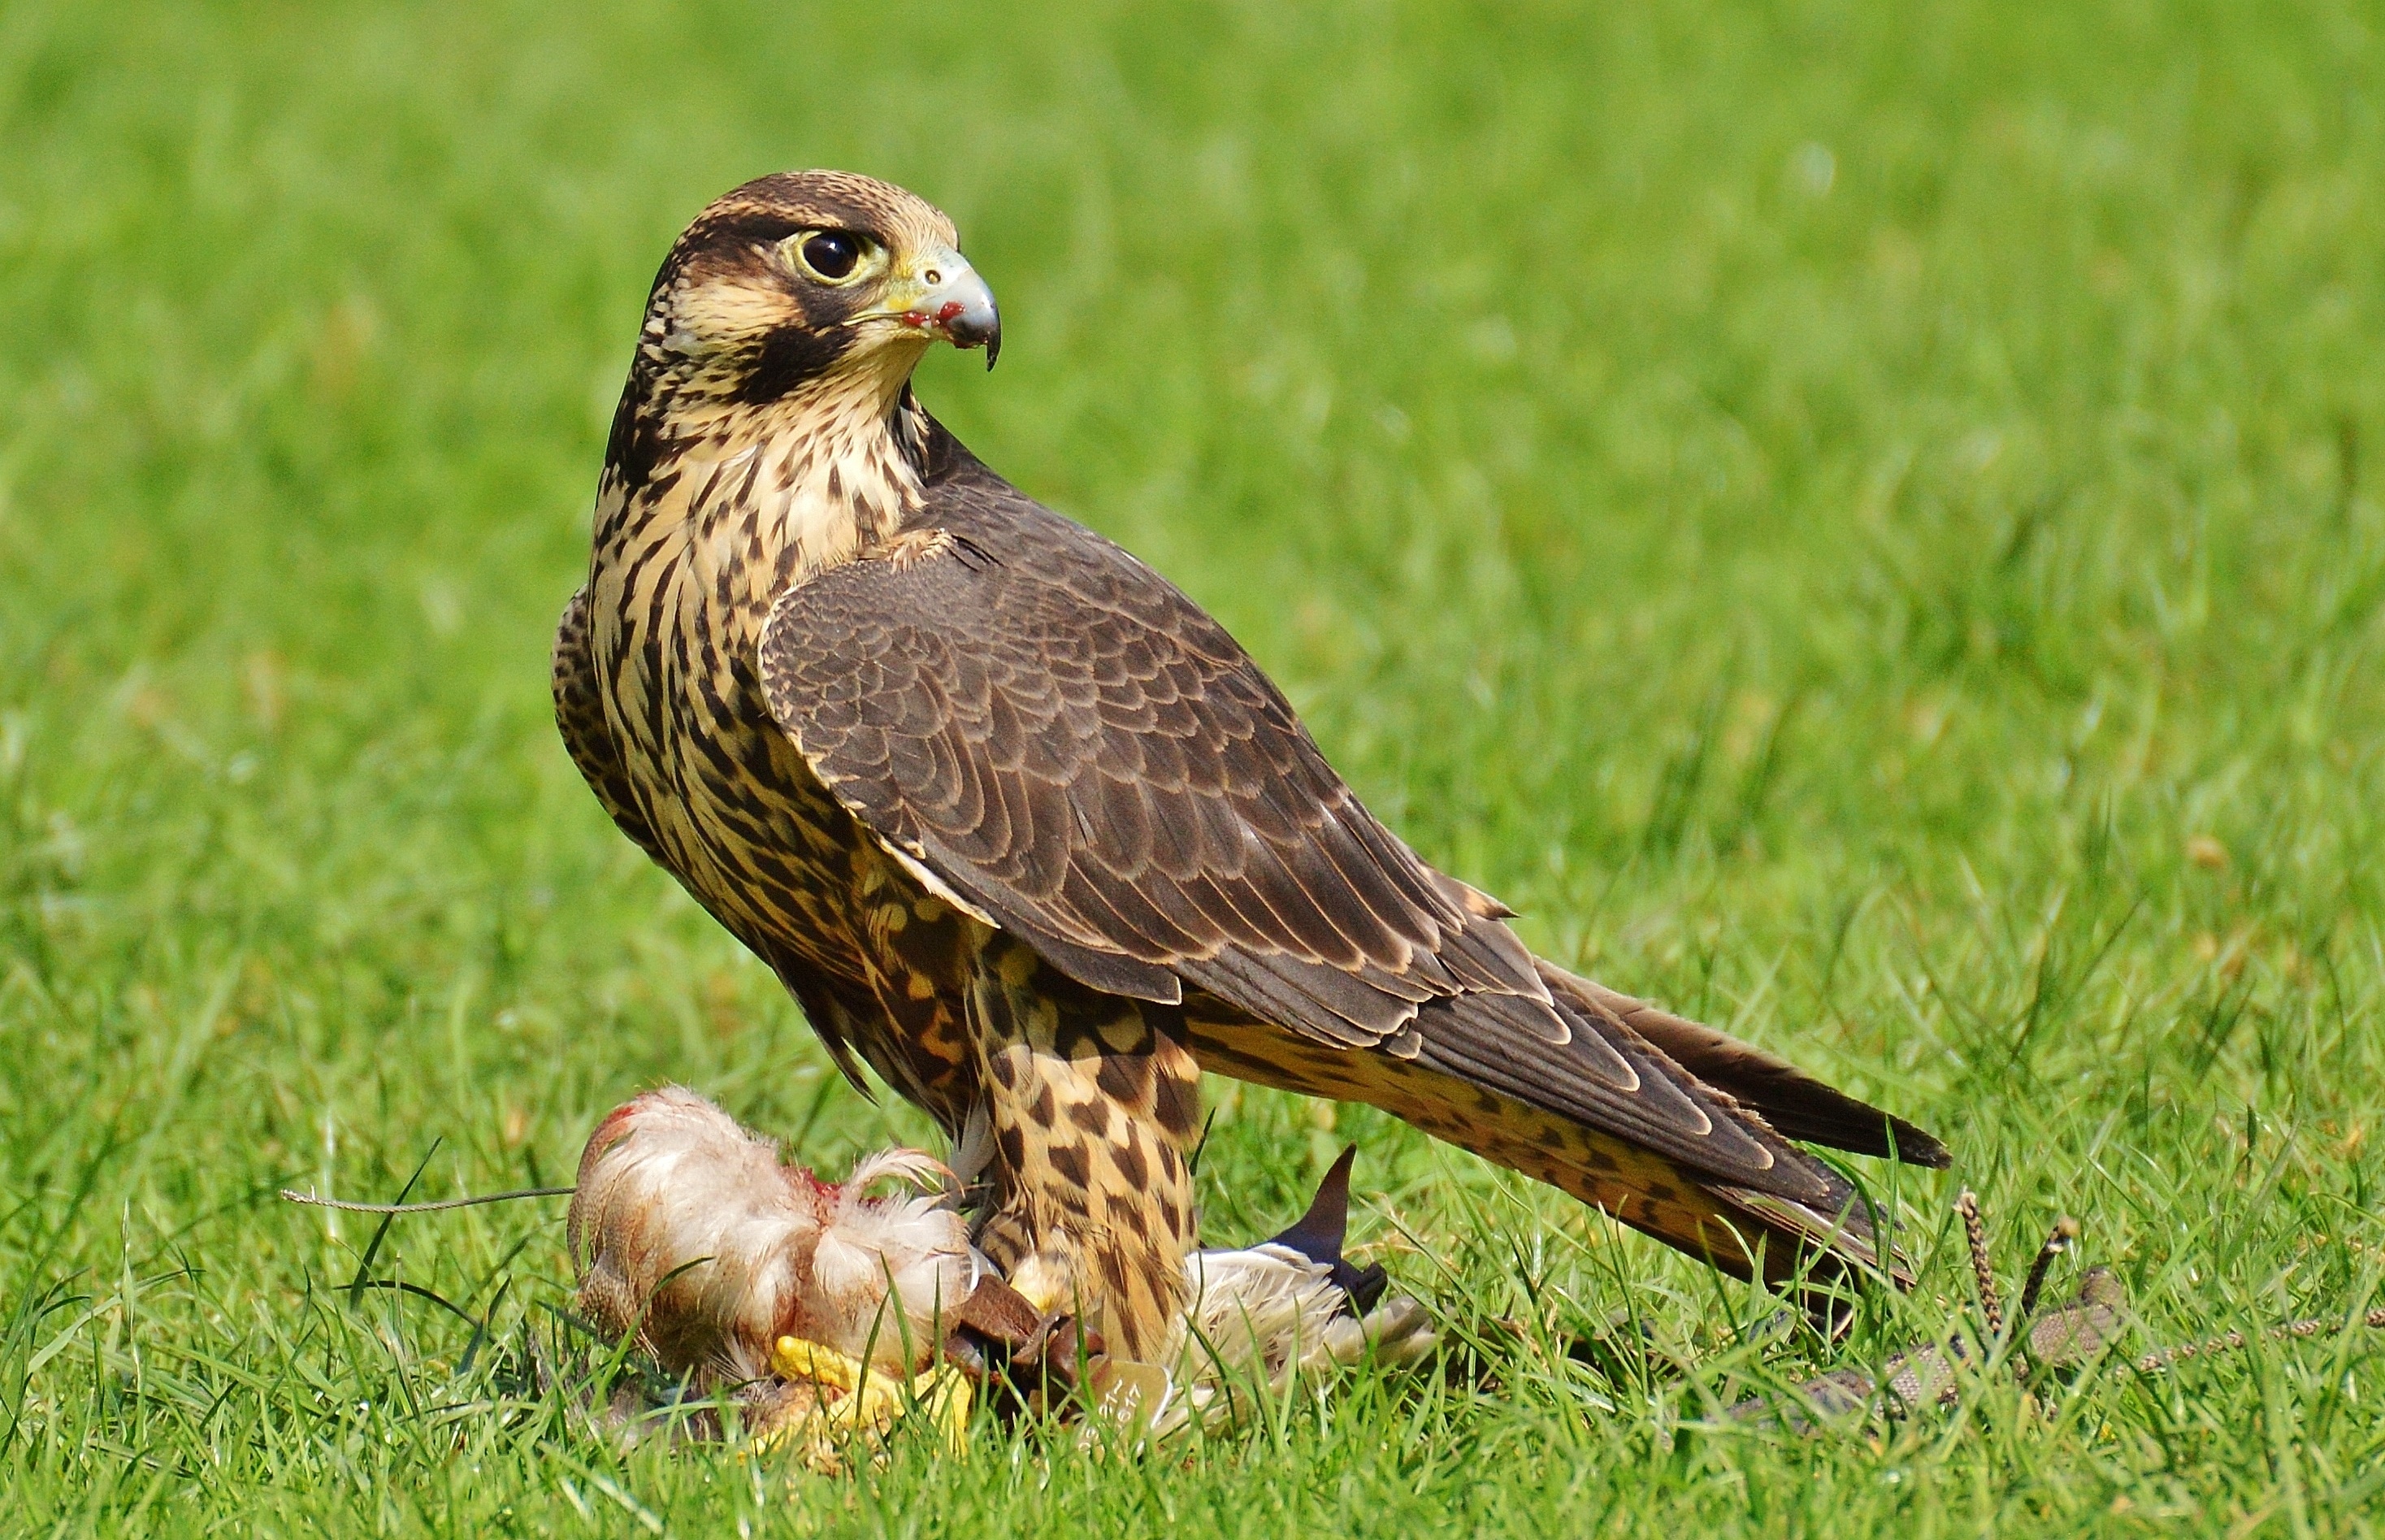 Falcon, Wildpark Poing, Prey, Access, grass, one animal